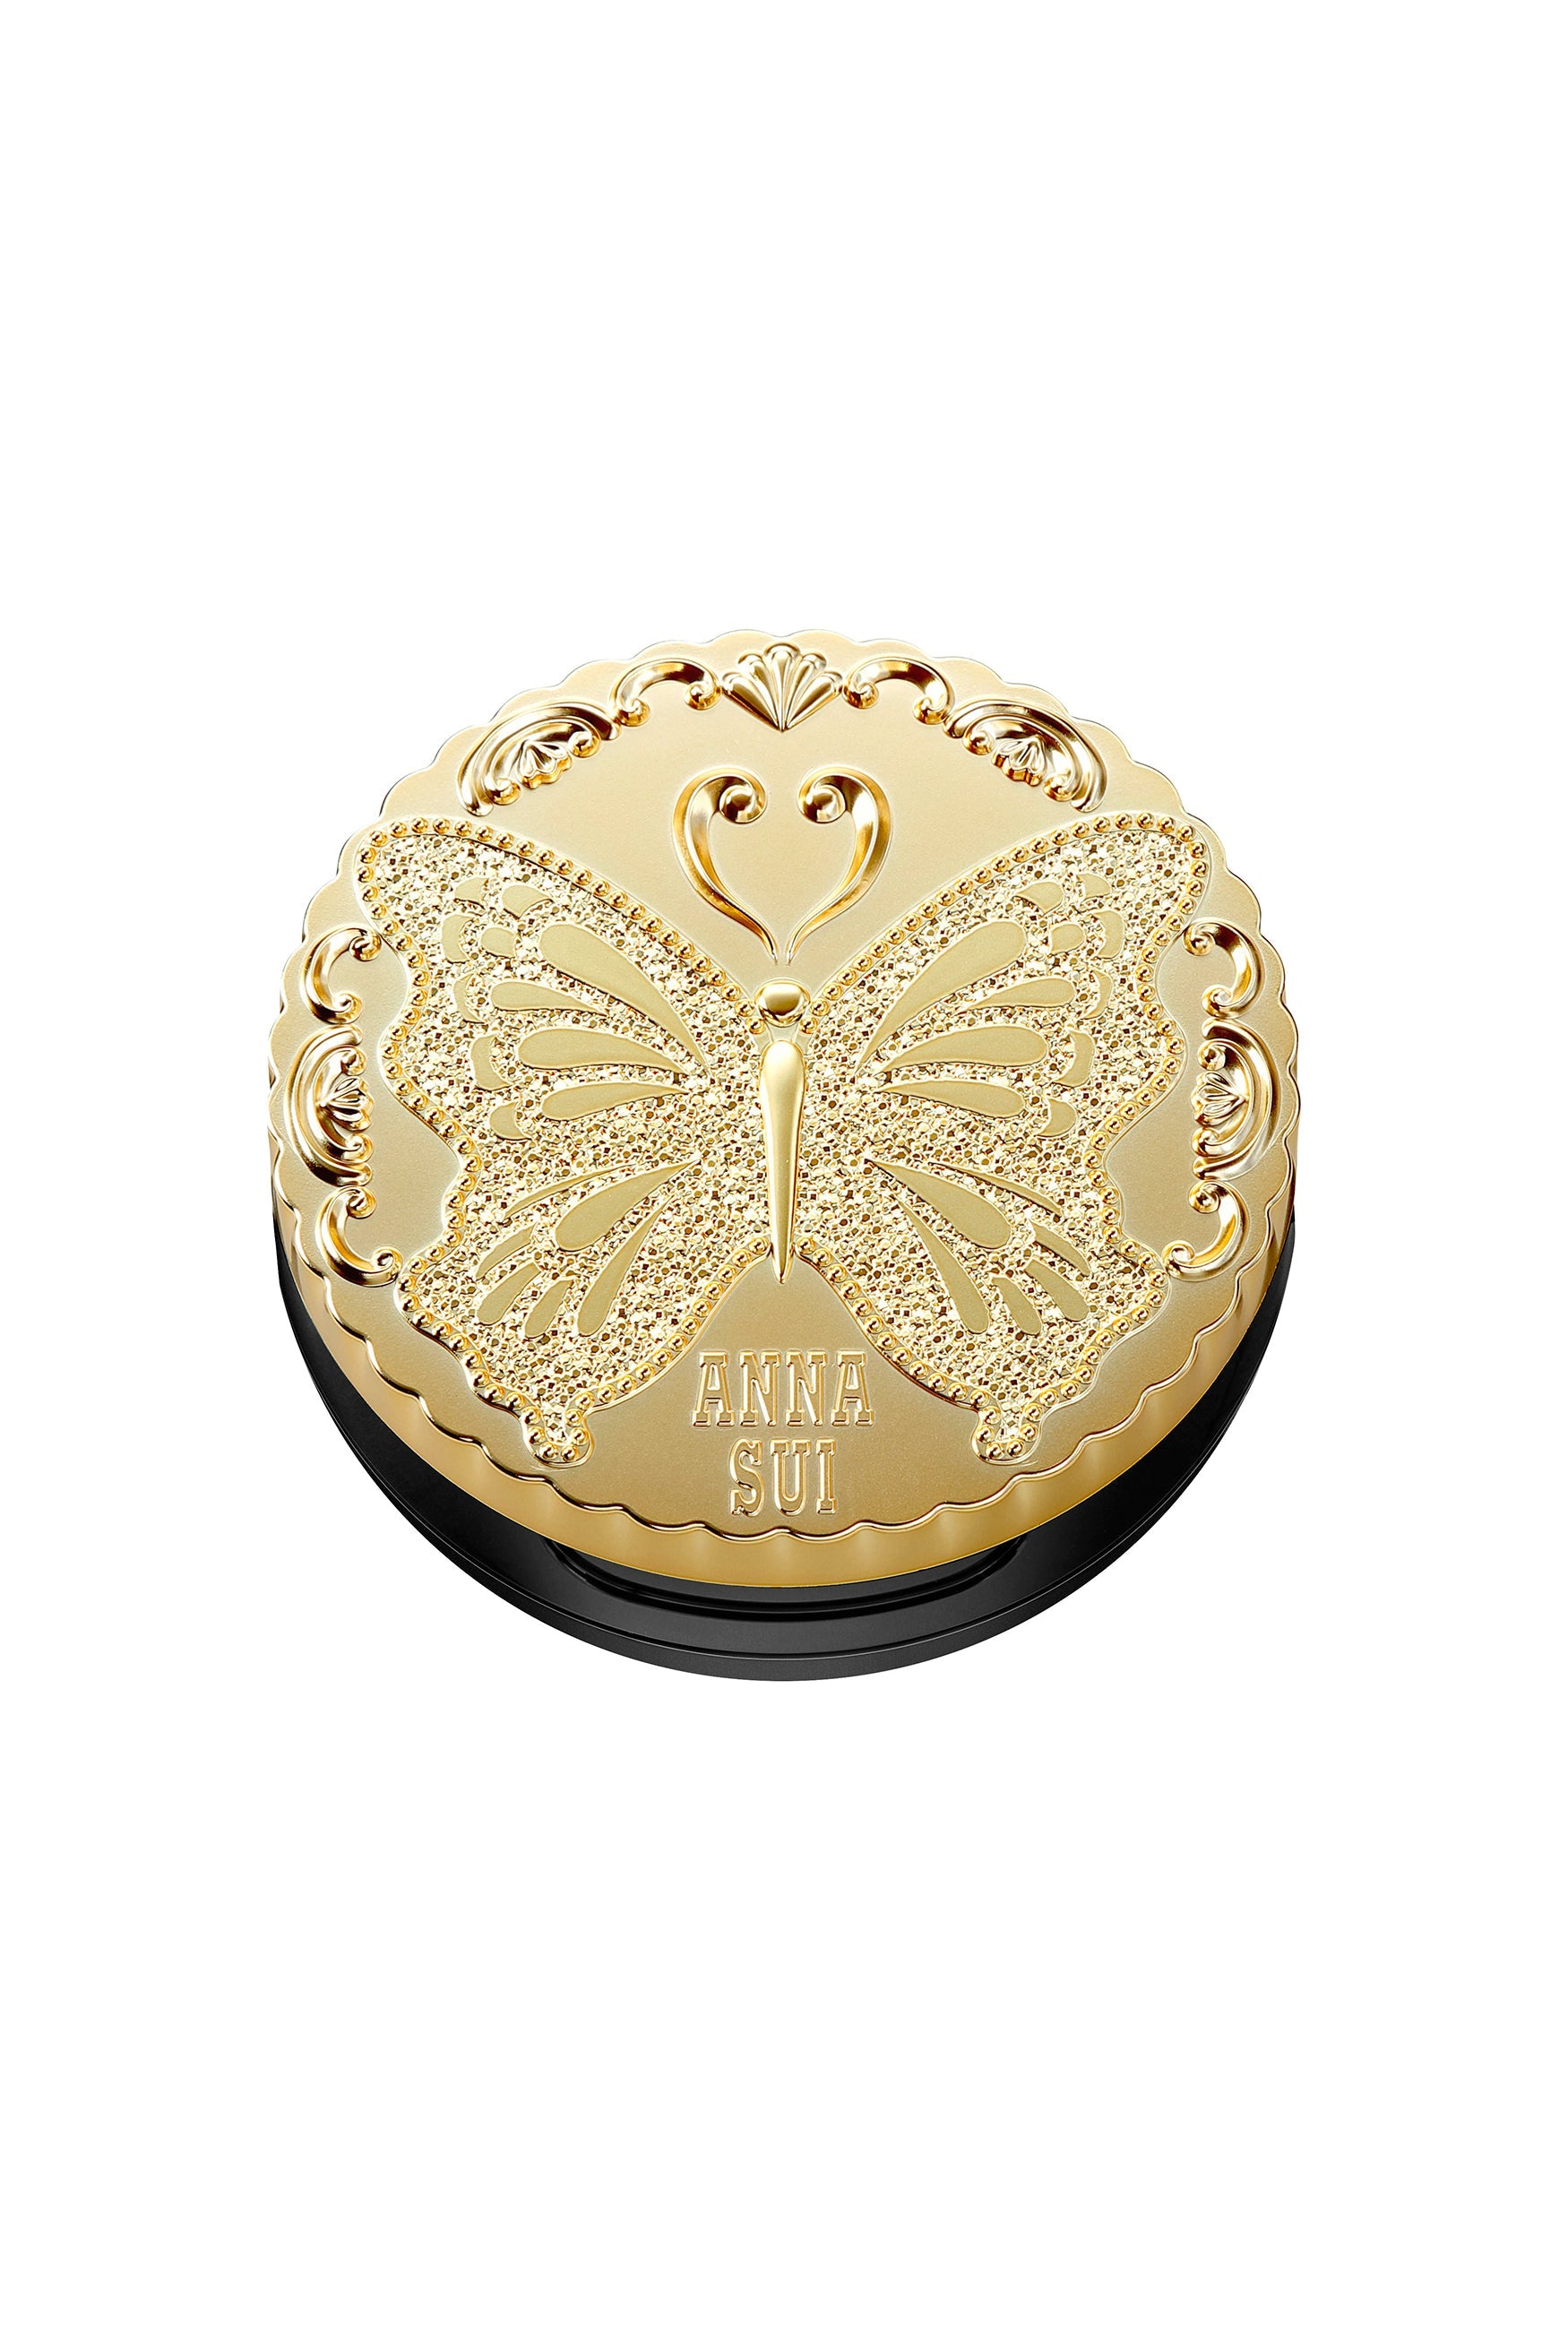 Classic Loose Powder gold round box with a butterfly engrave on top, perfect for on the go